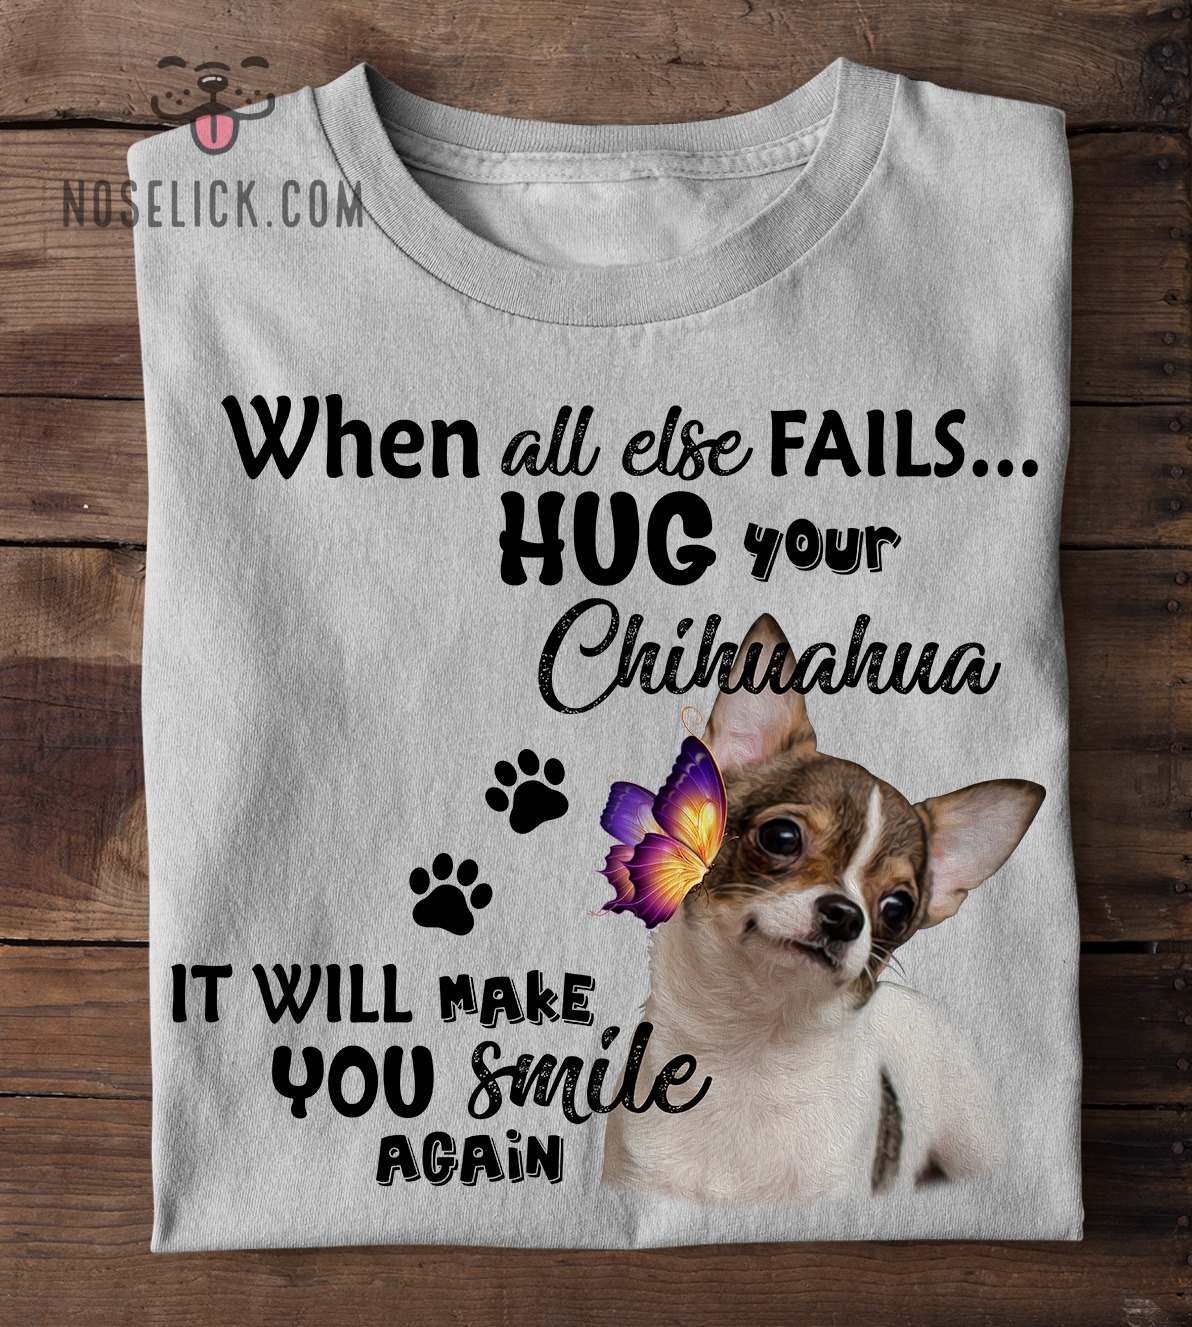 Butterfly Chihuahua Dog - When all else fails hug your chihuahua it will make you smile again